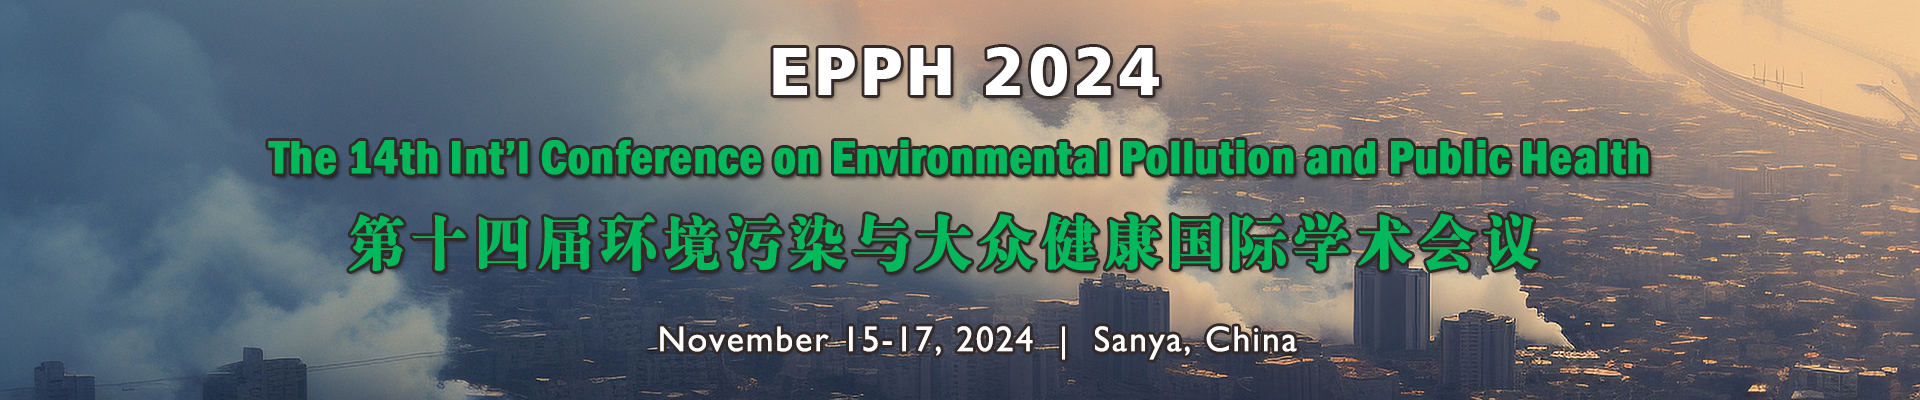 The 14th International Conference on Environmental Pollution and Public Health (EPPH 2024), Sanya, Hainan, China